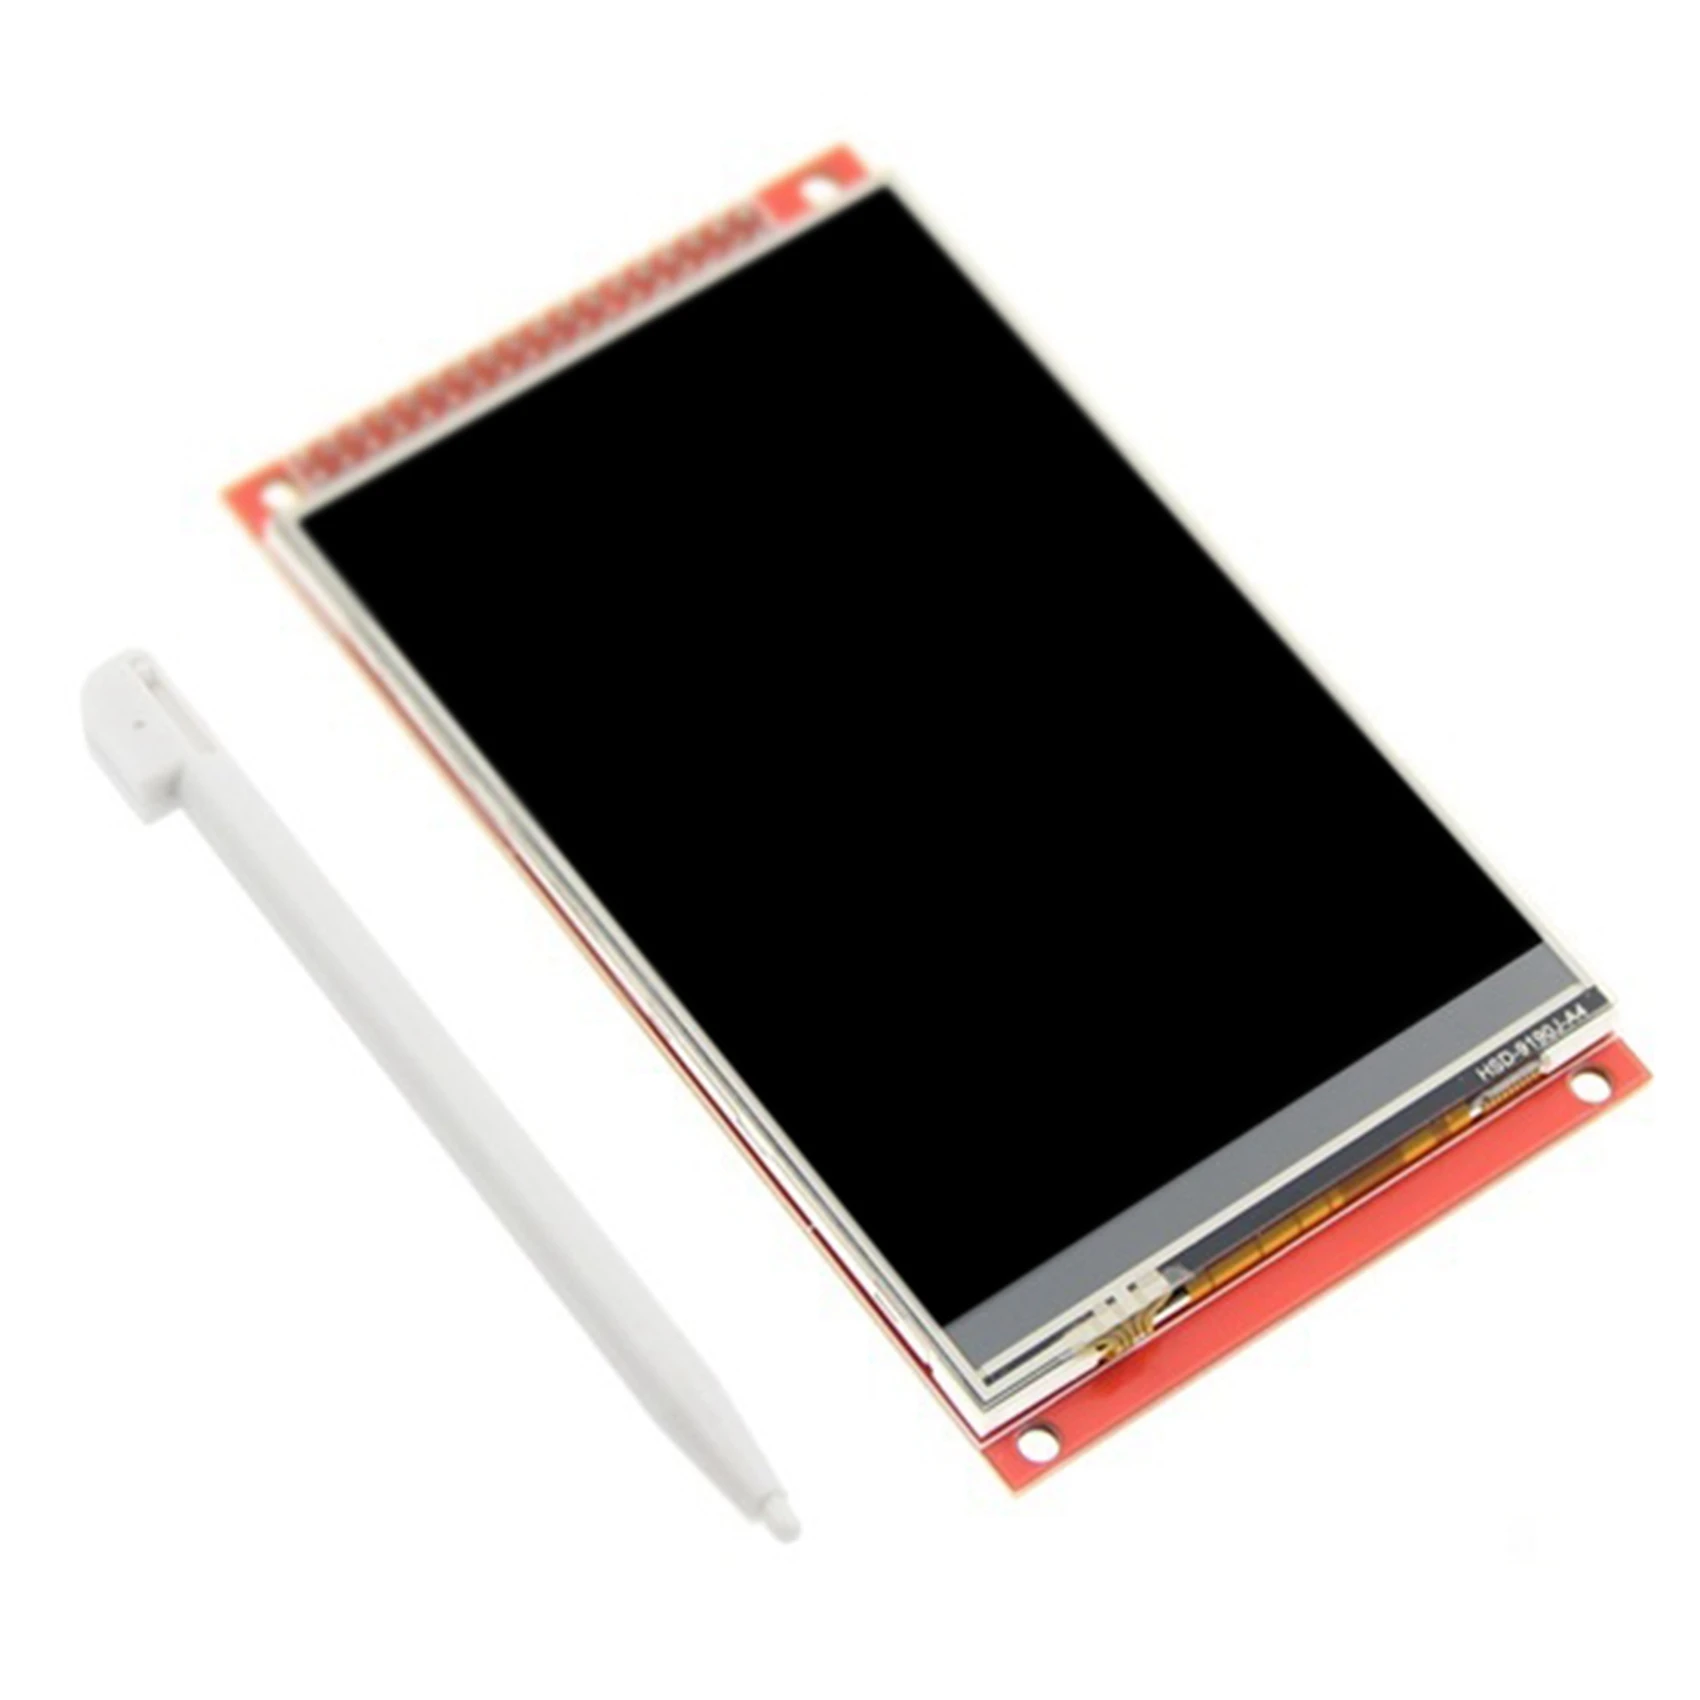 

3.95/4.0 Inch TFT Color Screen Module Touch Screen Module 320X480 HD Display for Arduino Mega2560